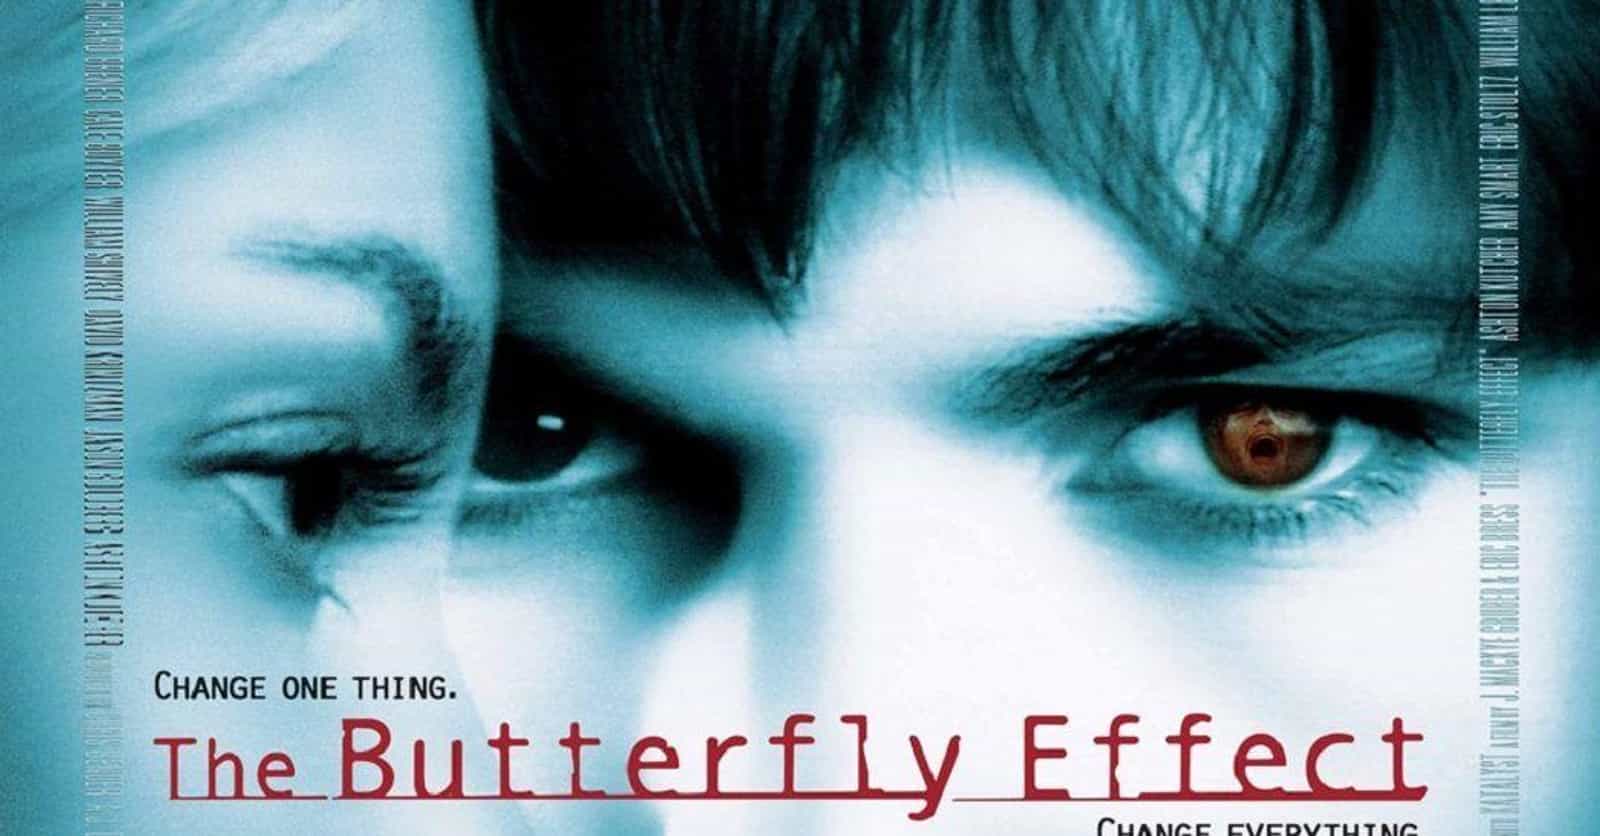 People Share Their Weirdest Real-Life 'Butterfly Effect' Stories